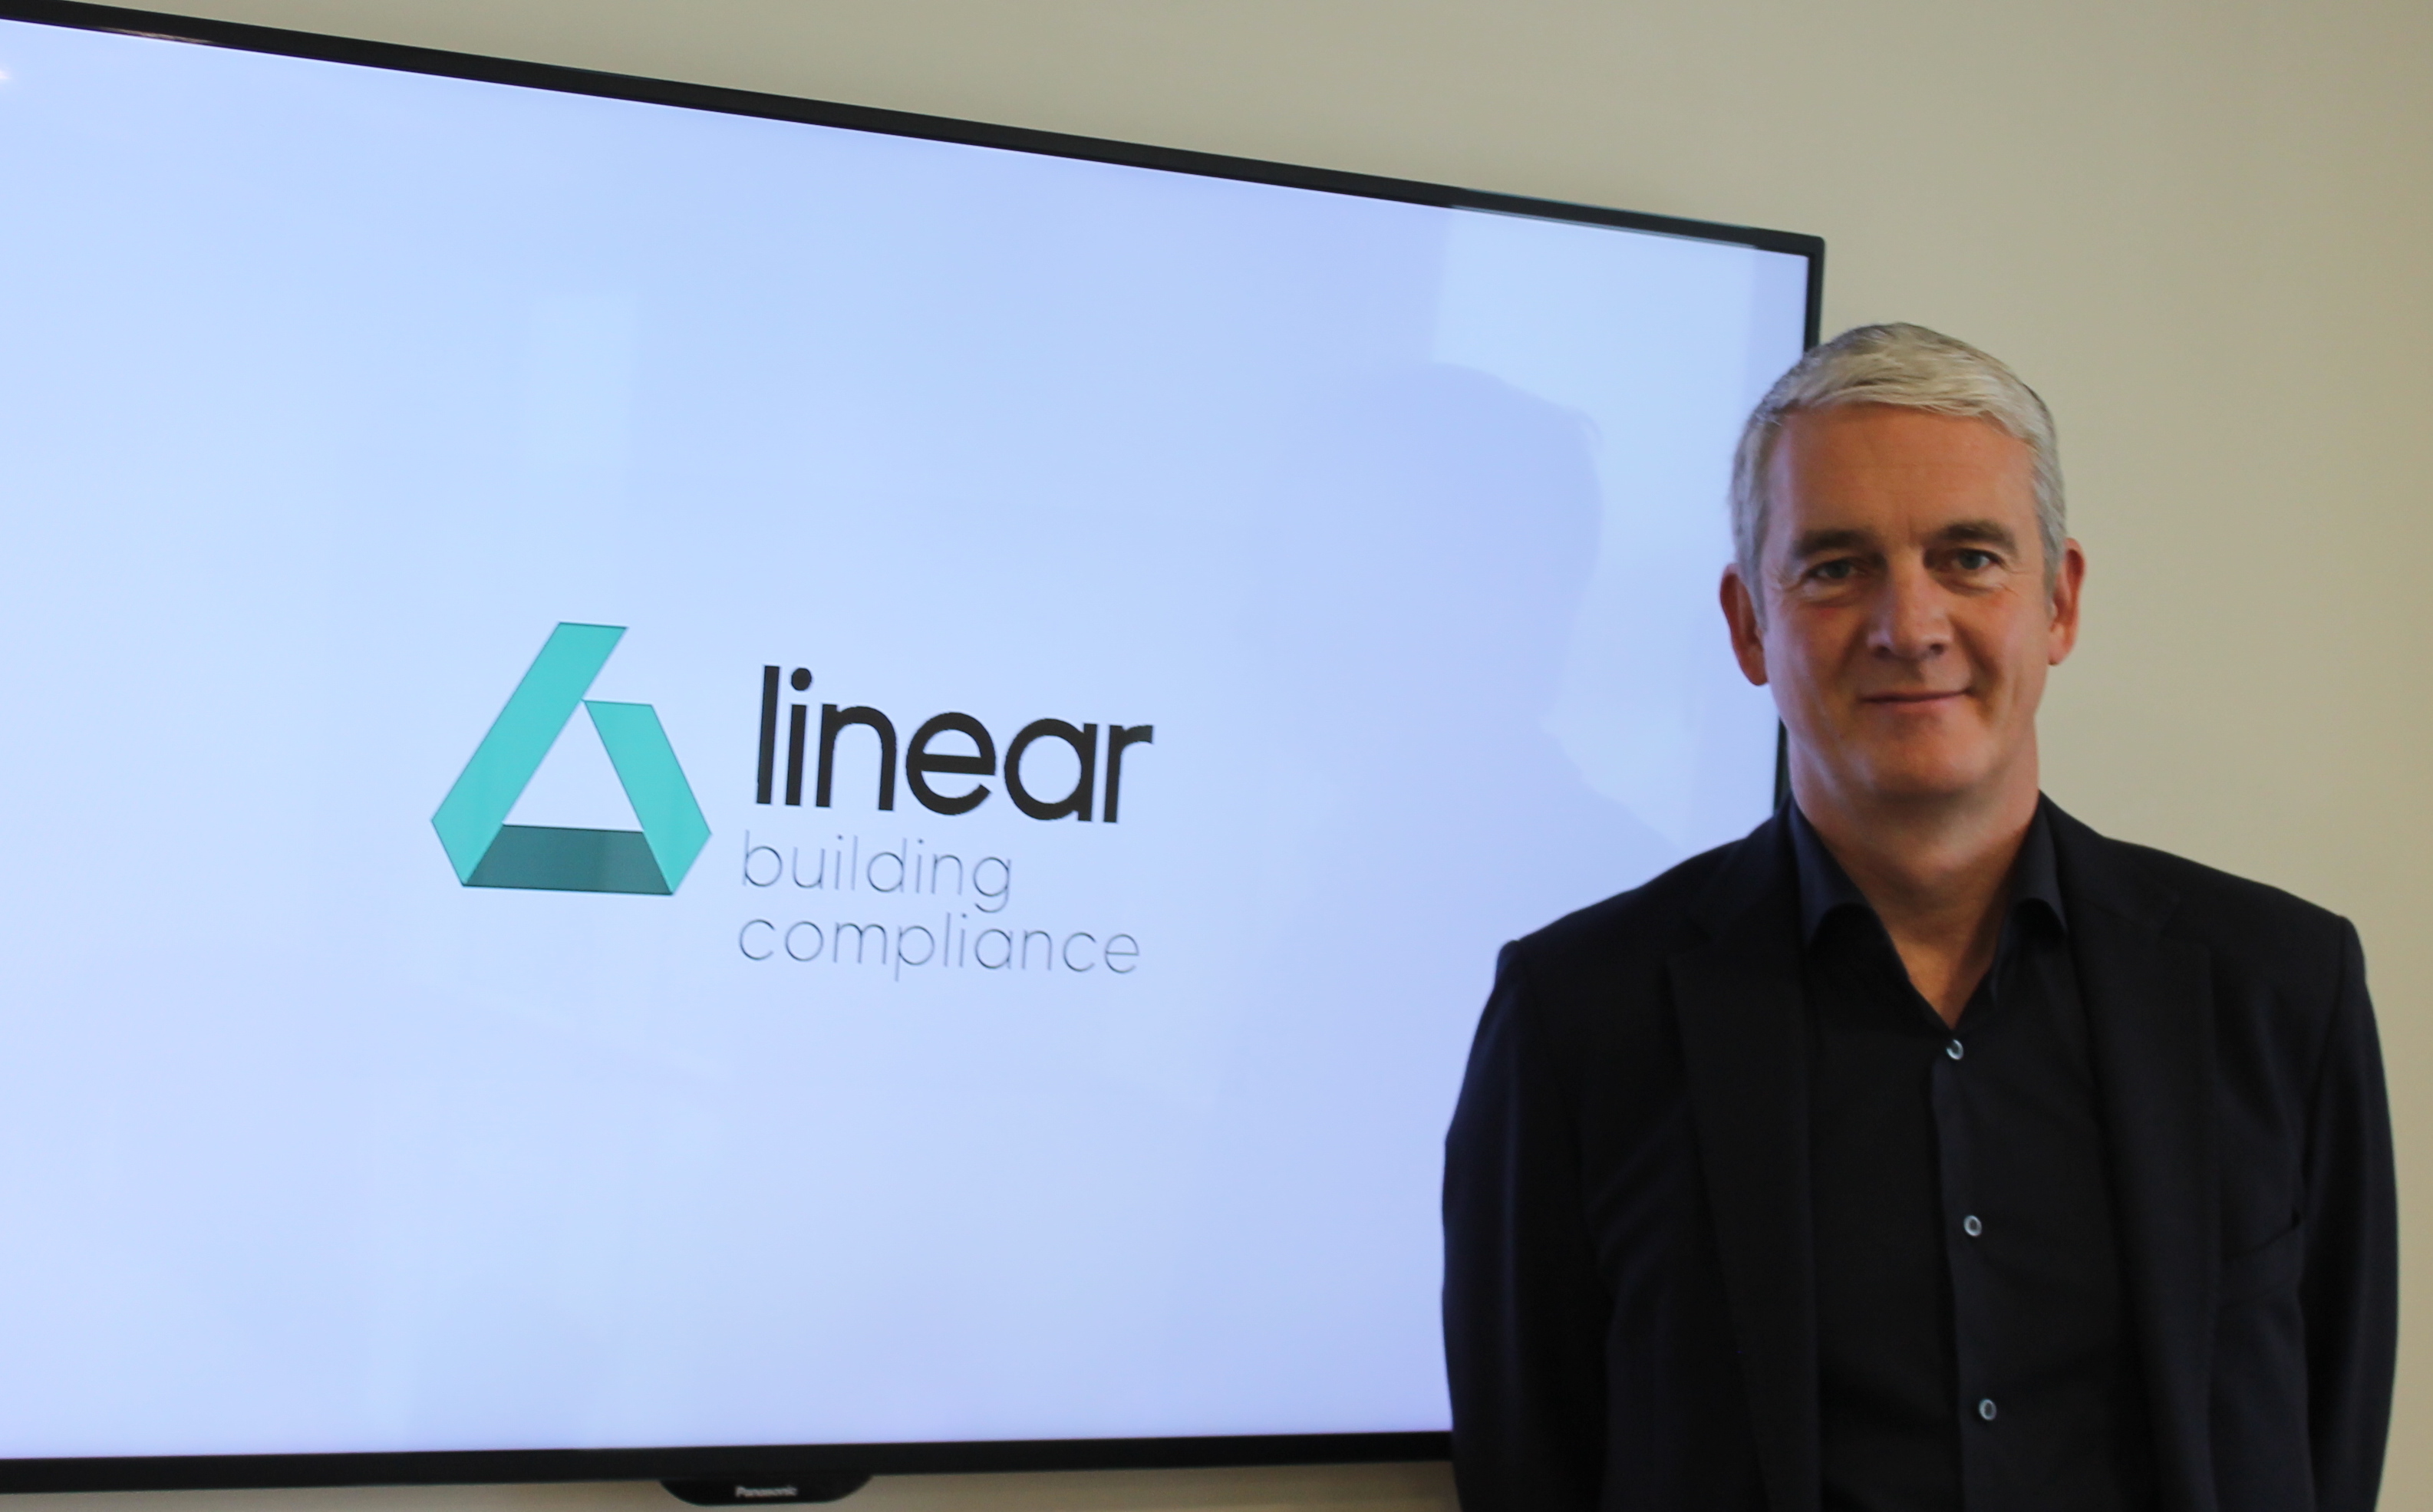 Linear Group unveils new building compliance division as turnover tops £30m